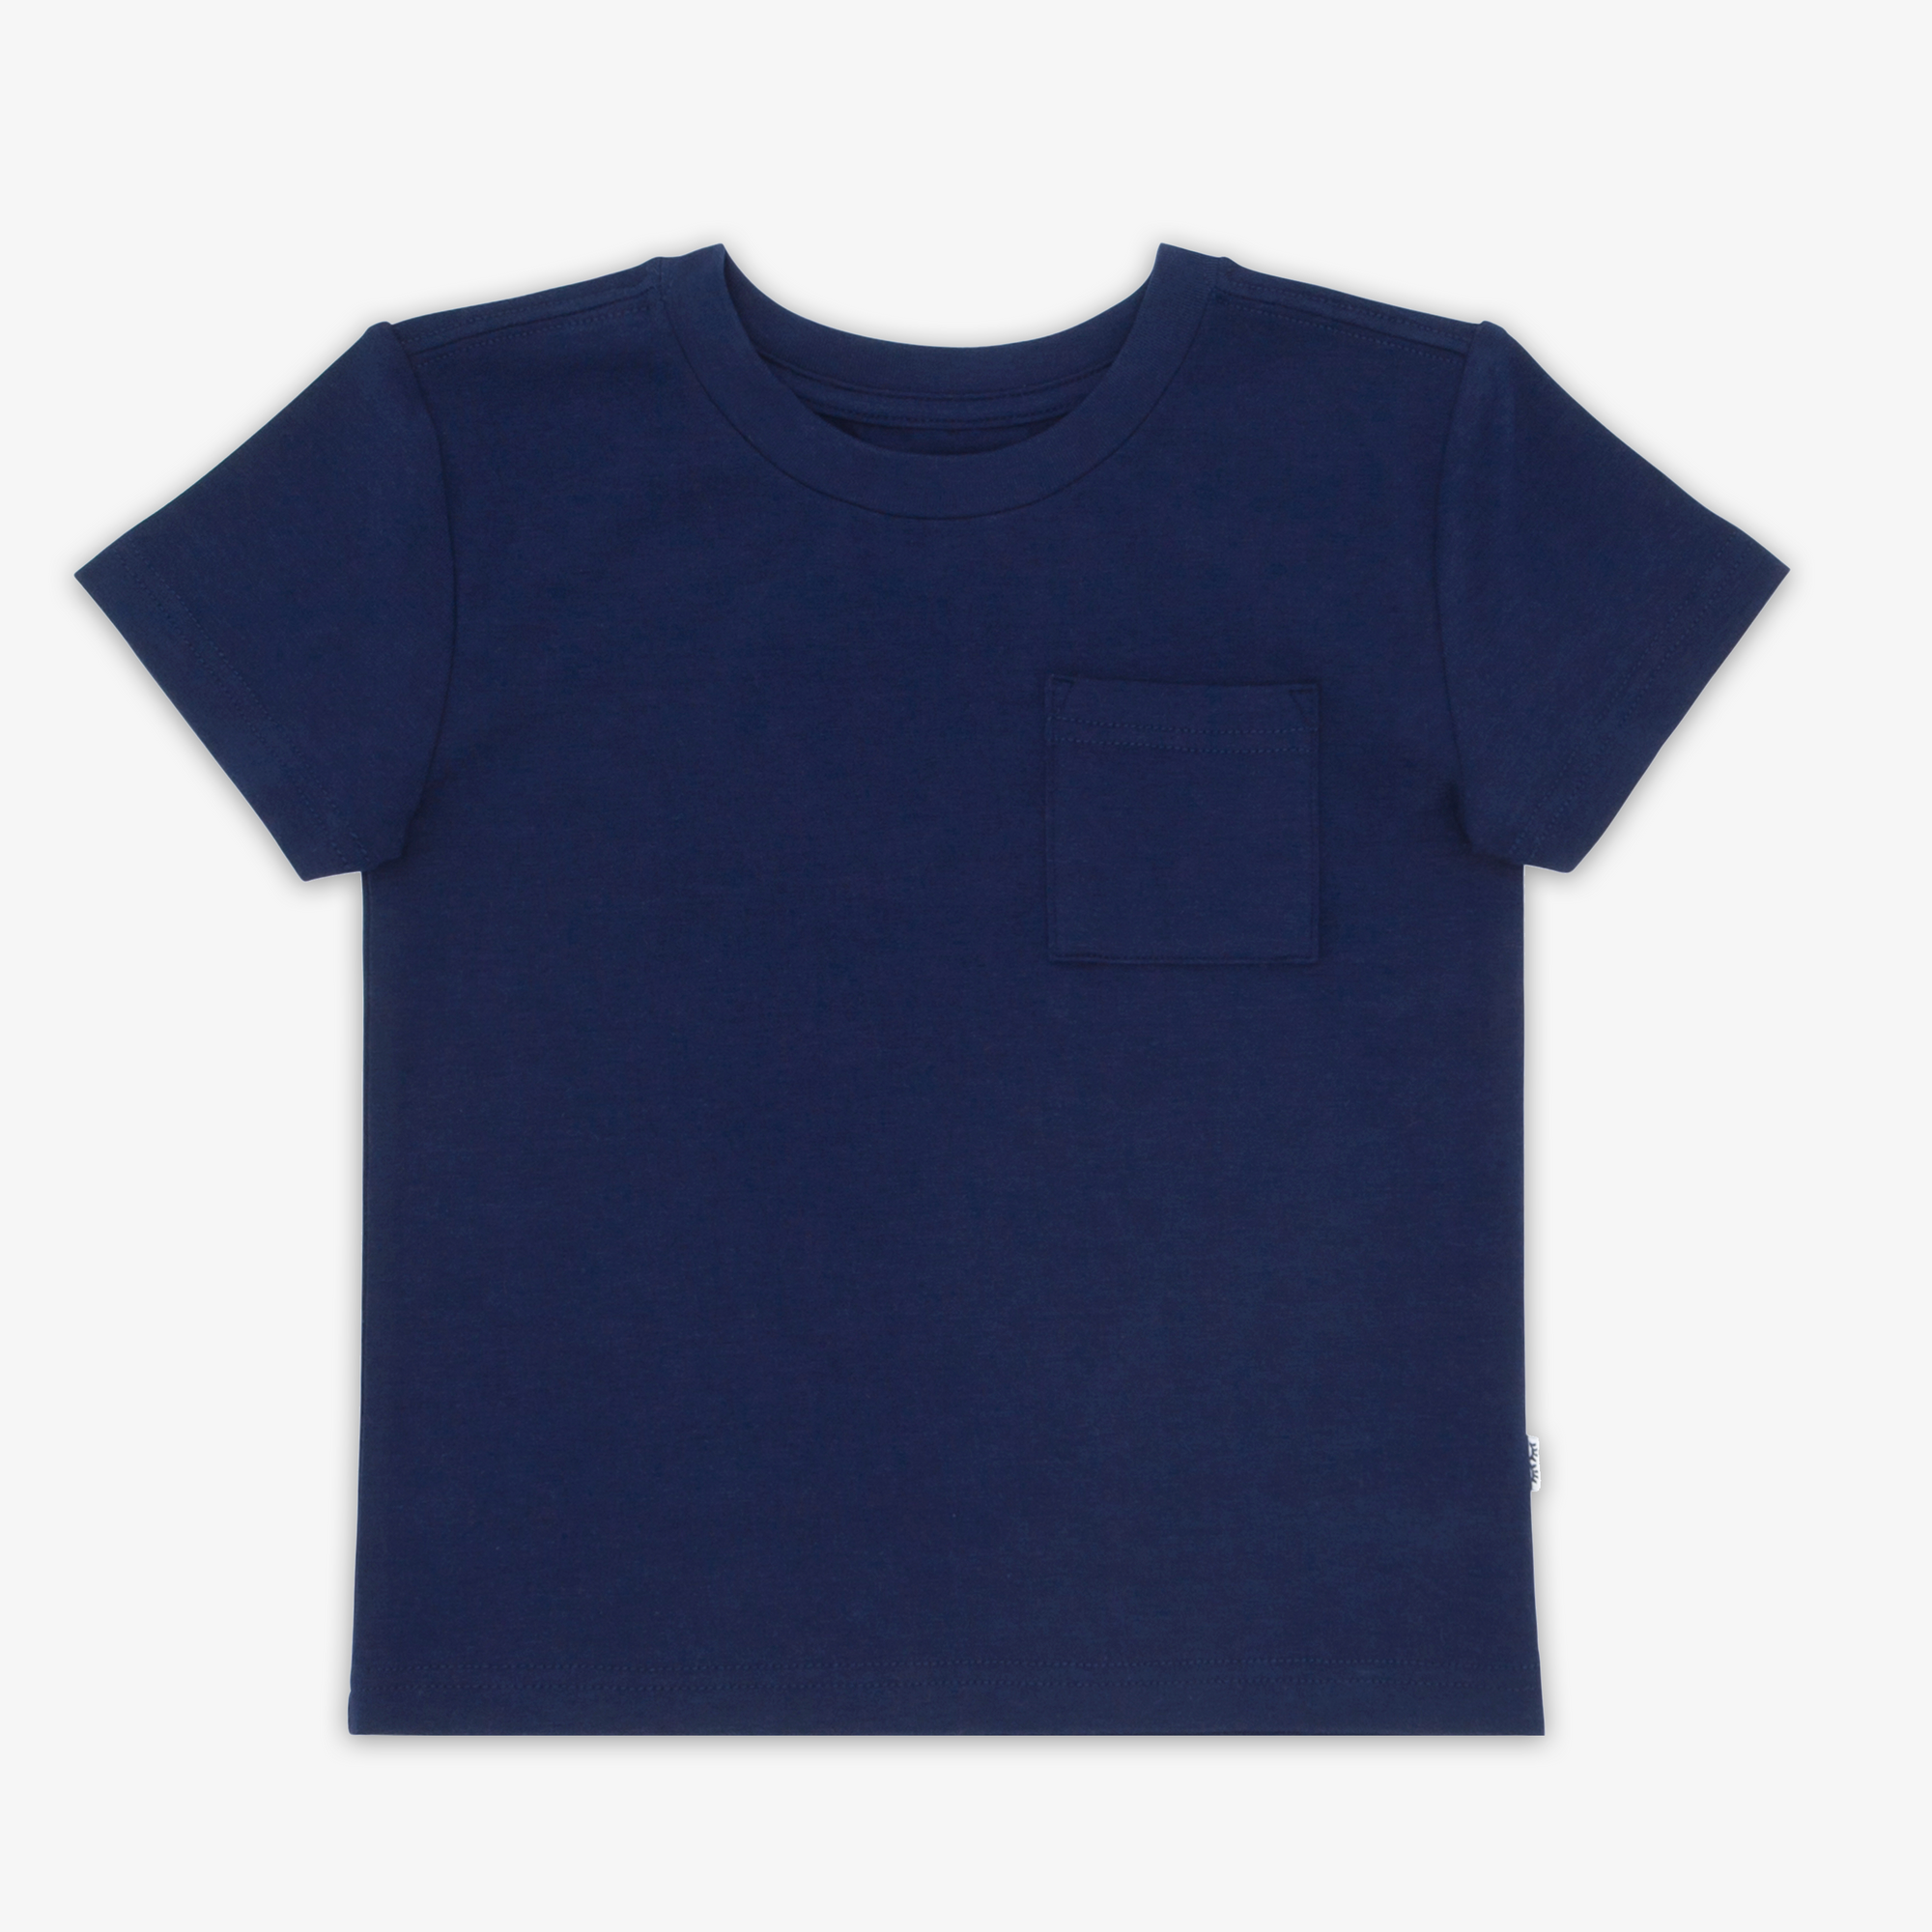 Flat lay image of the Classic Navy Short Sleeve Relaxed Pocket Tee